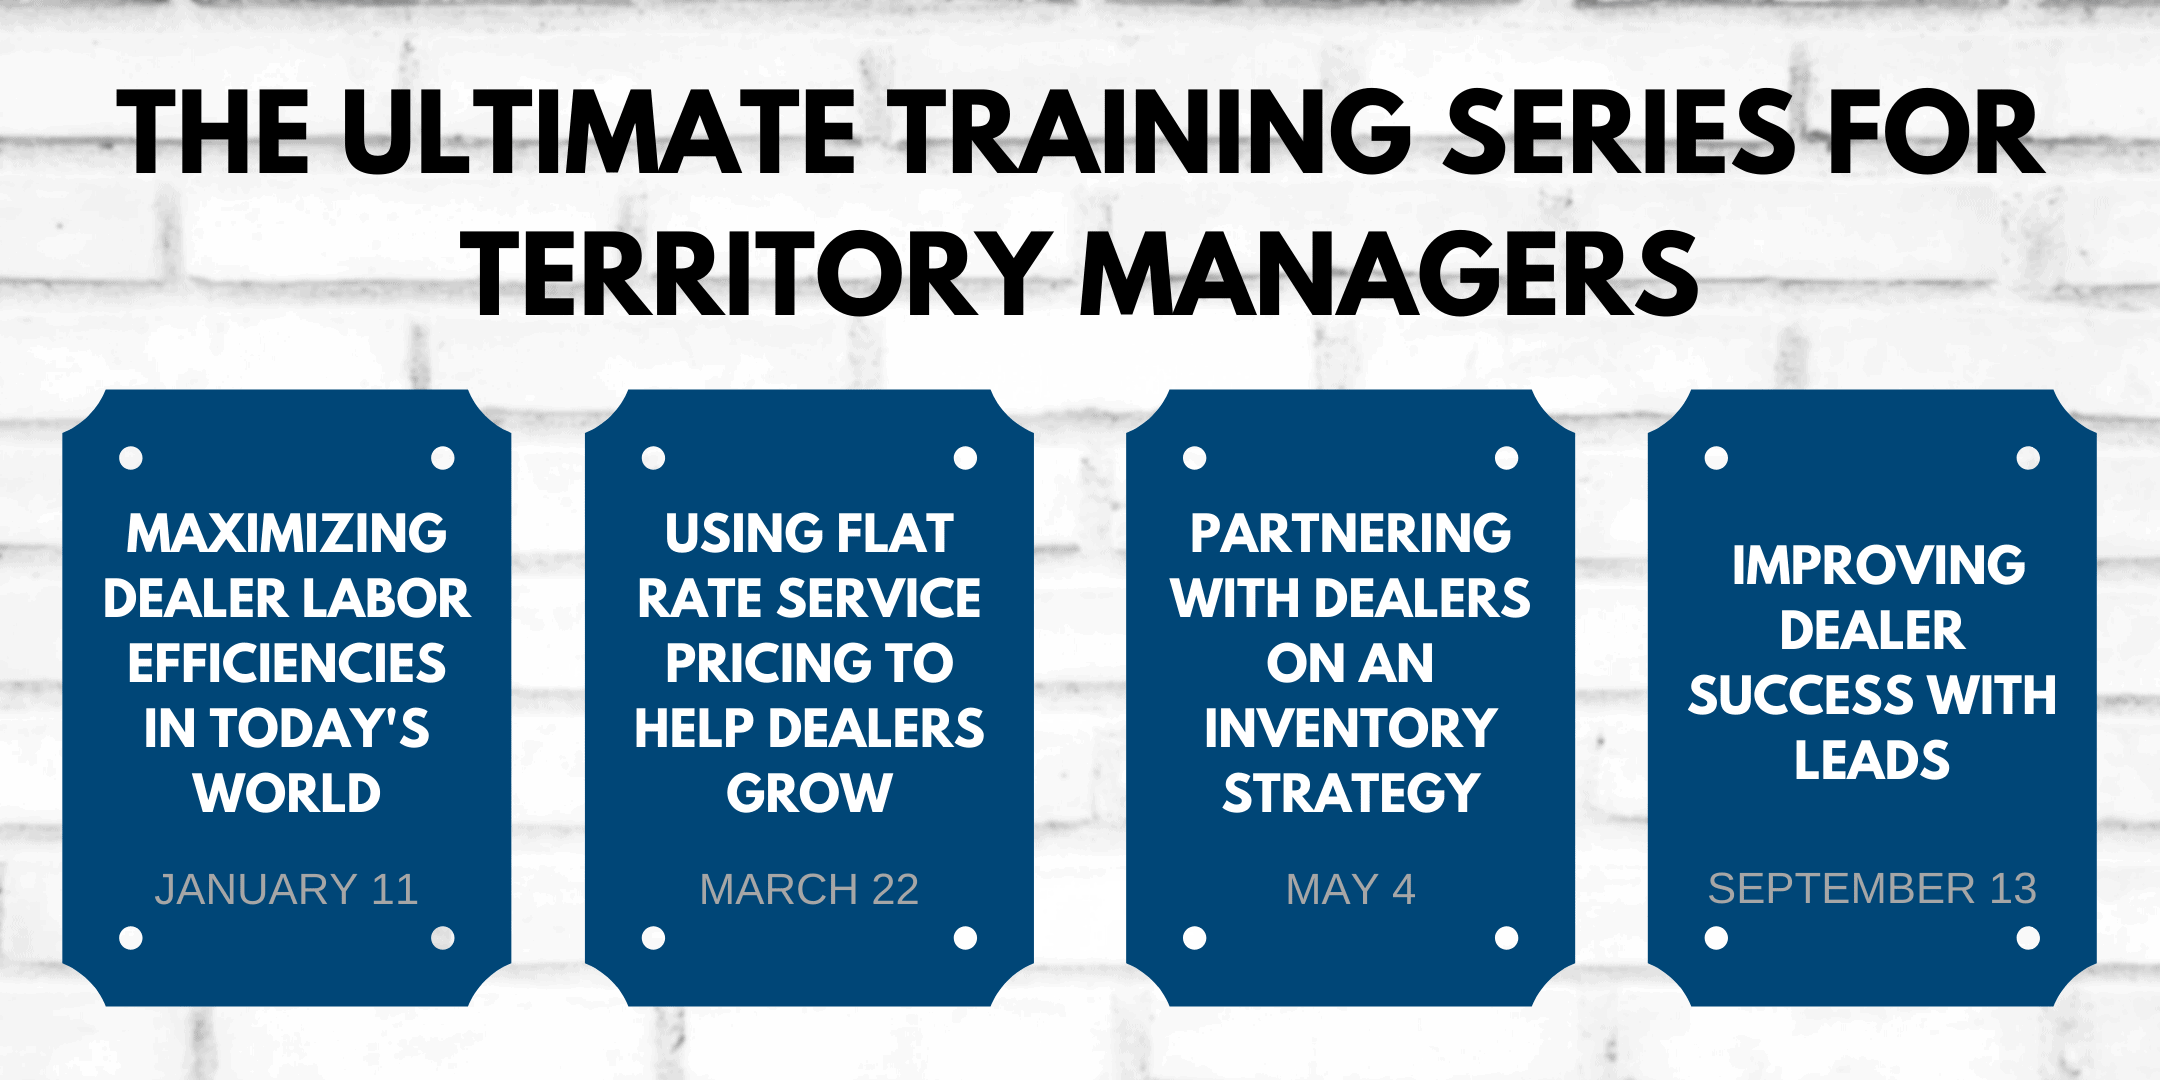 Territory Manager training